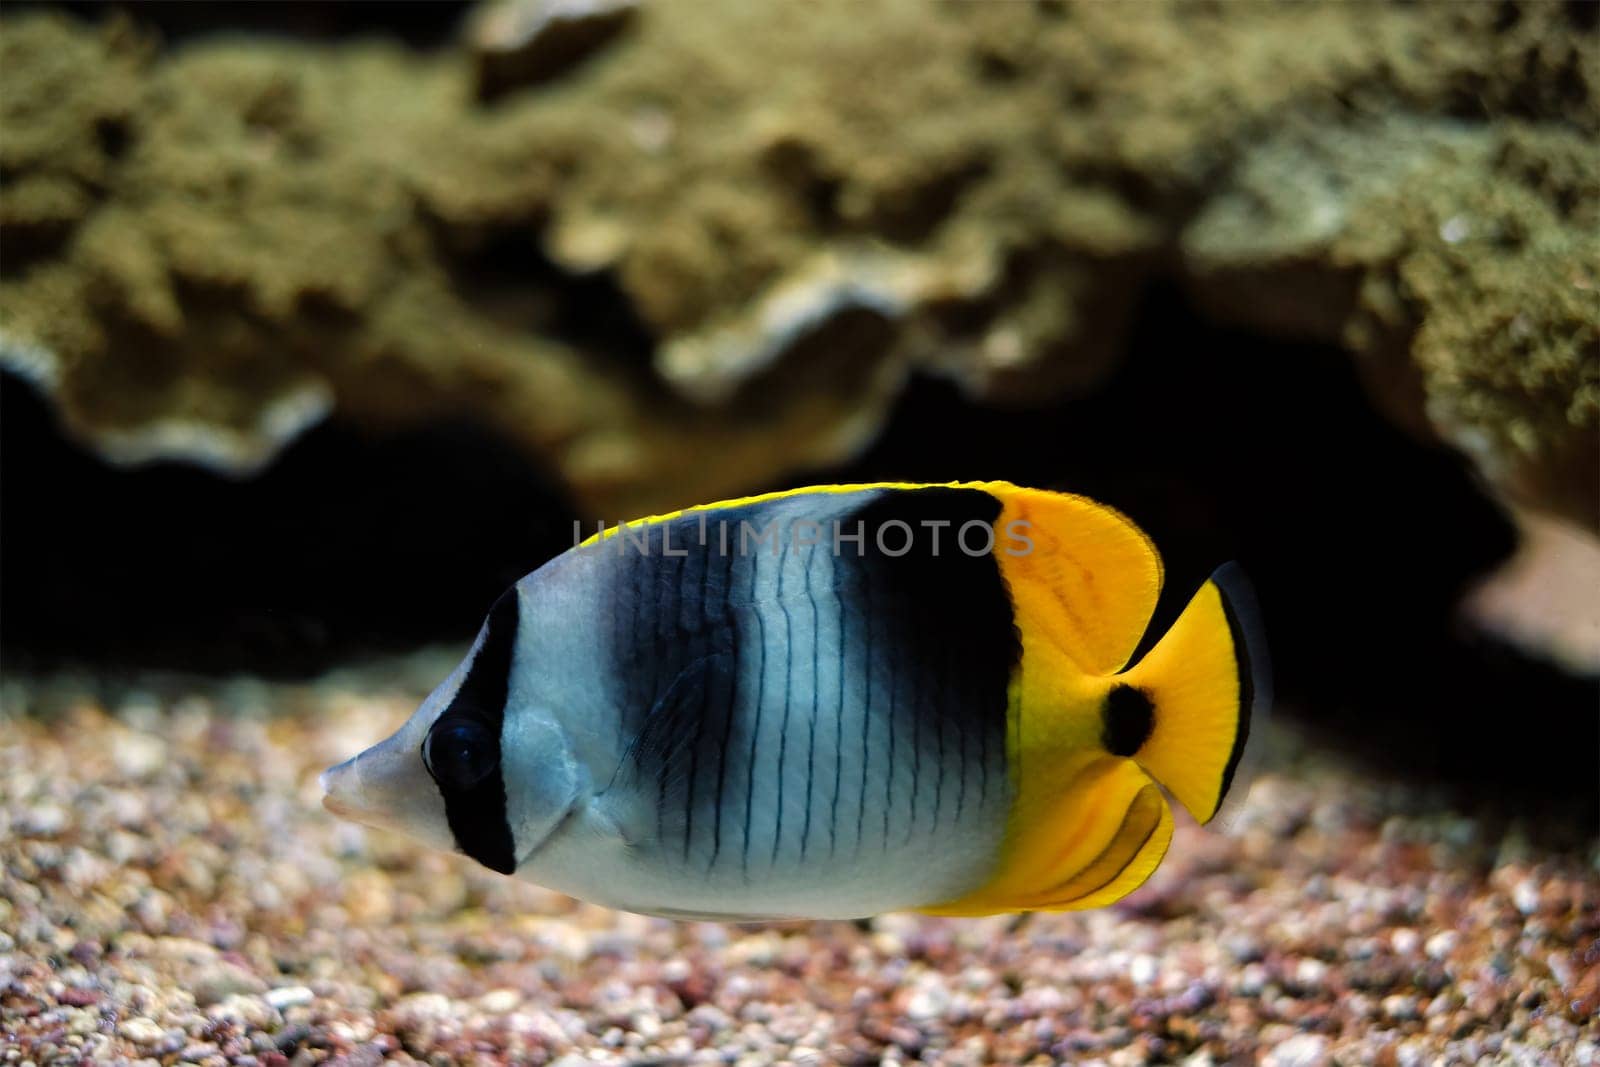 Pacific double-saddle butterflyfish Chaetodon ulietensis fish underwater in sea by dimol